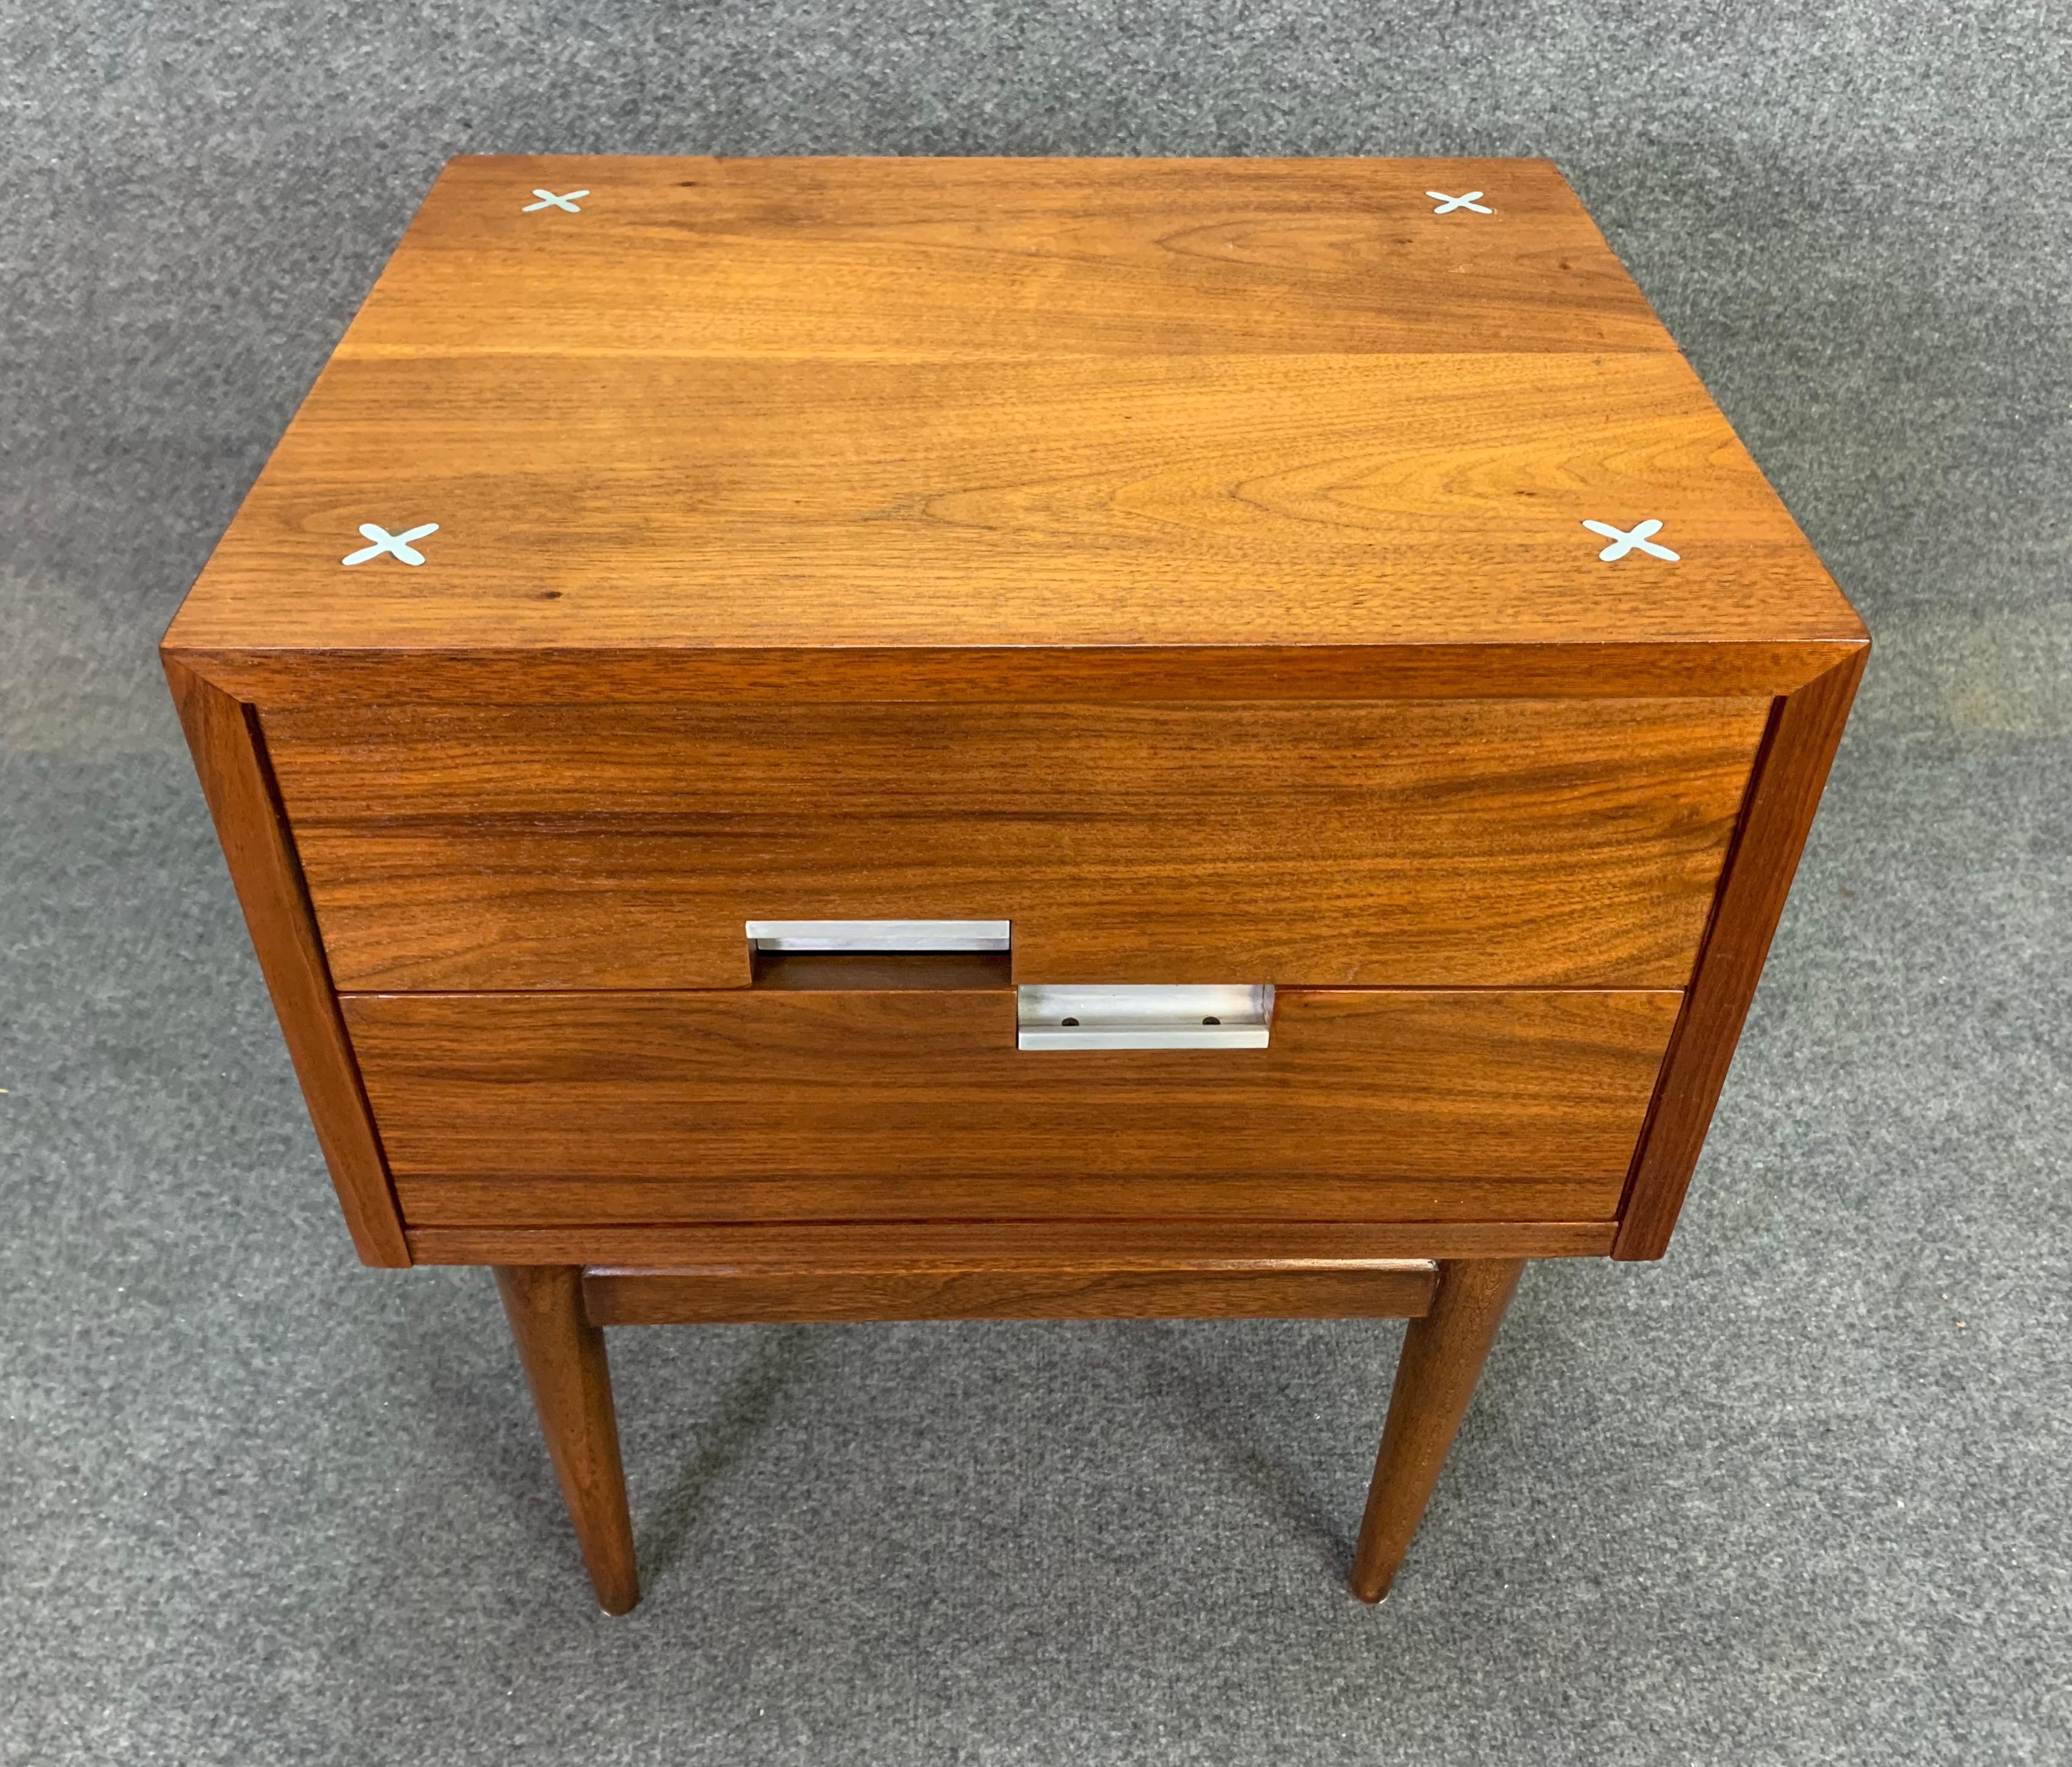 Here is a beautiful single night or side table in walnut designed by Merton Gershun and manufactured in the US by American of Martinsville in the 1960s. This fully refinished and exquisite piece features a set of 2 dove tail drawers with aluminum